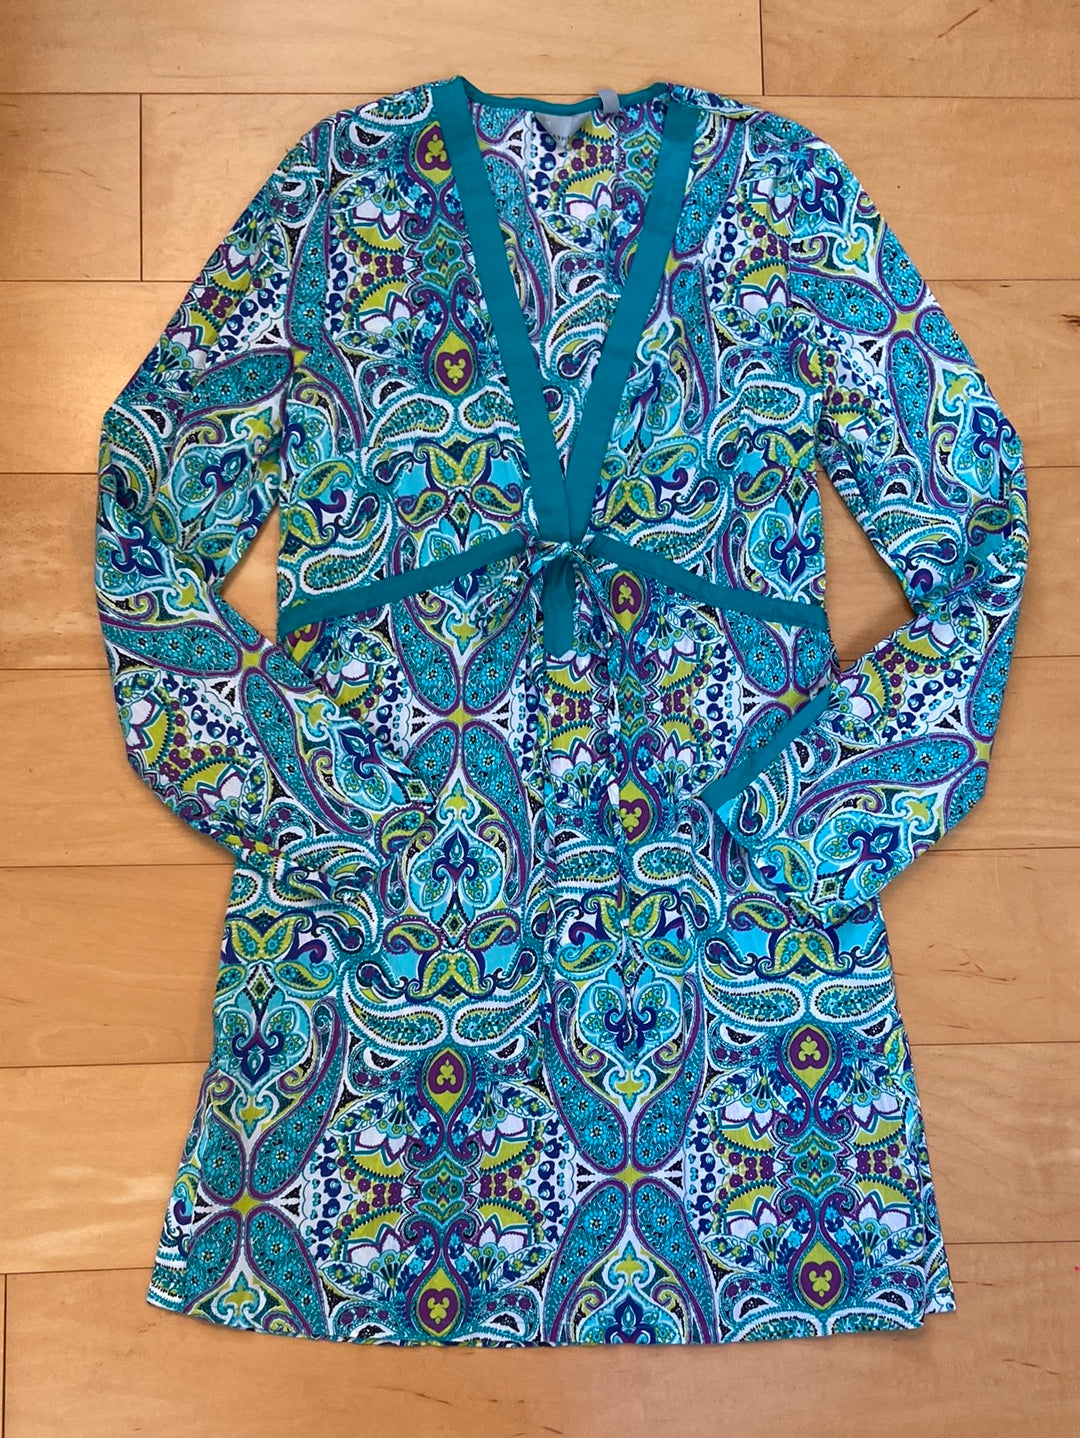 Aqua long sleeve cotton cover-up with floral paisley print and shades of green and blue deep V-neck tie at waist